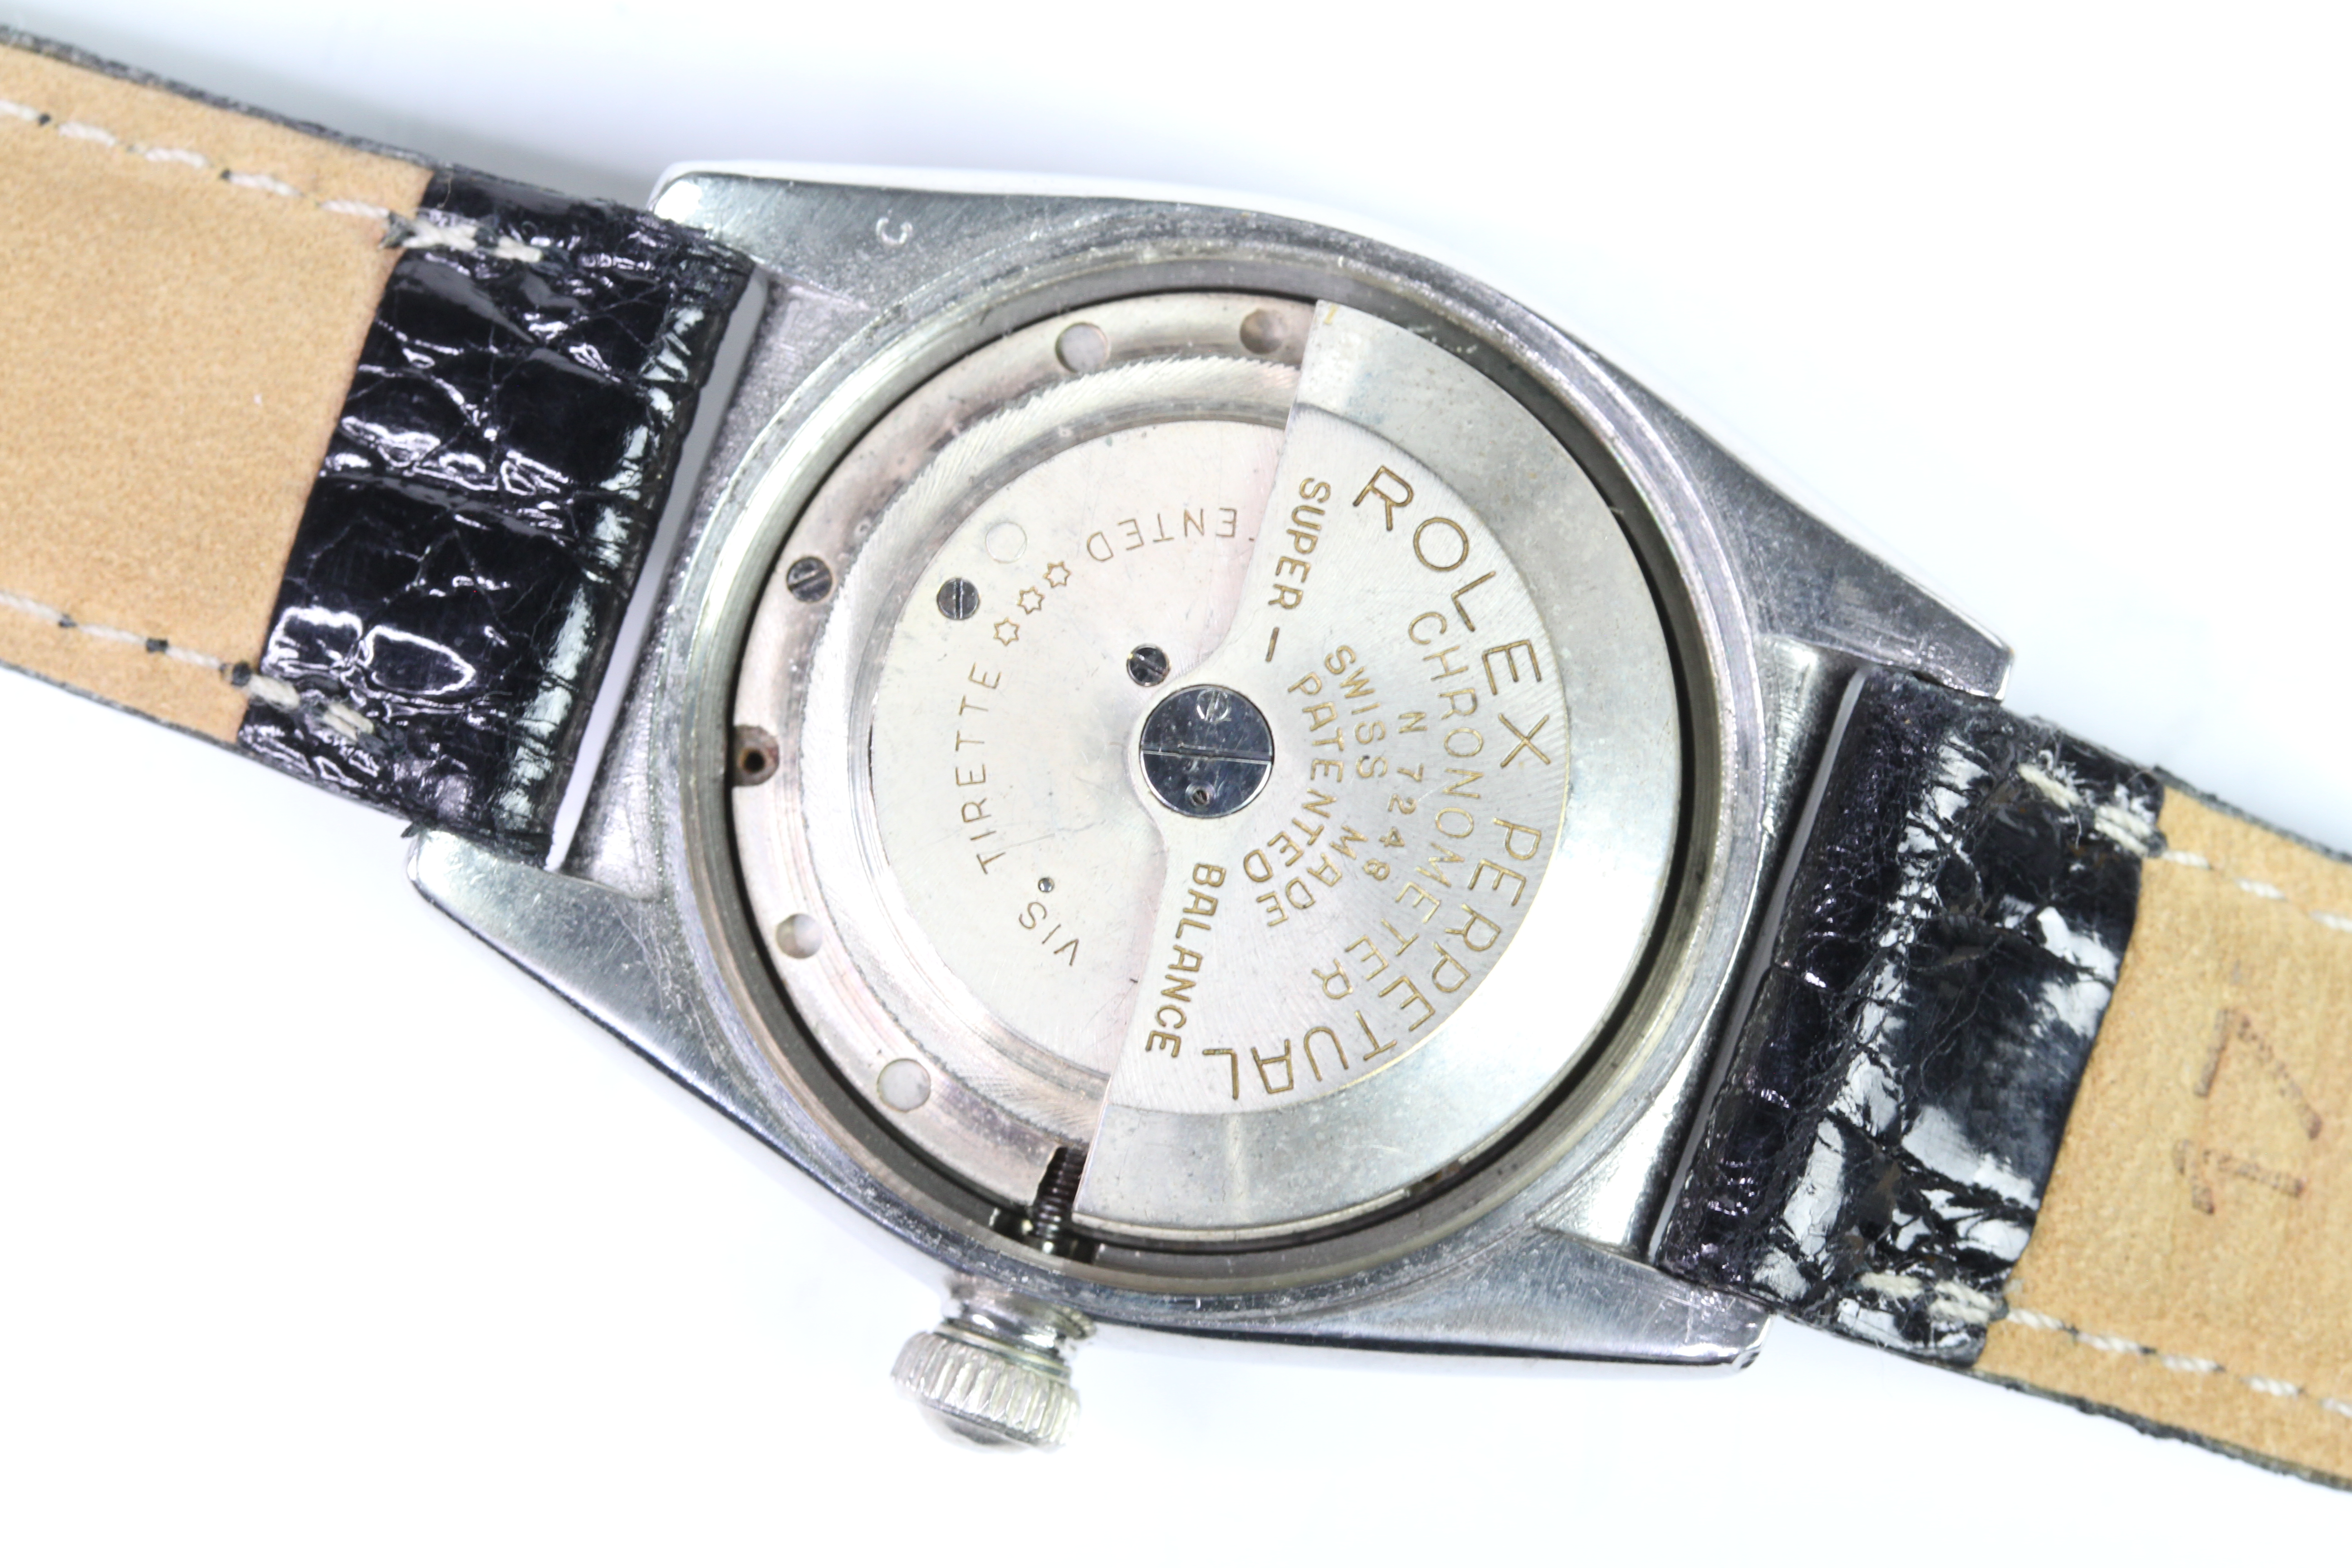 ROLEX OYSTER PERPETUAL 'BUBBLE BACK' REFERENCE 3372 CIRCA 1940s - Image 6 of 6